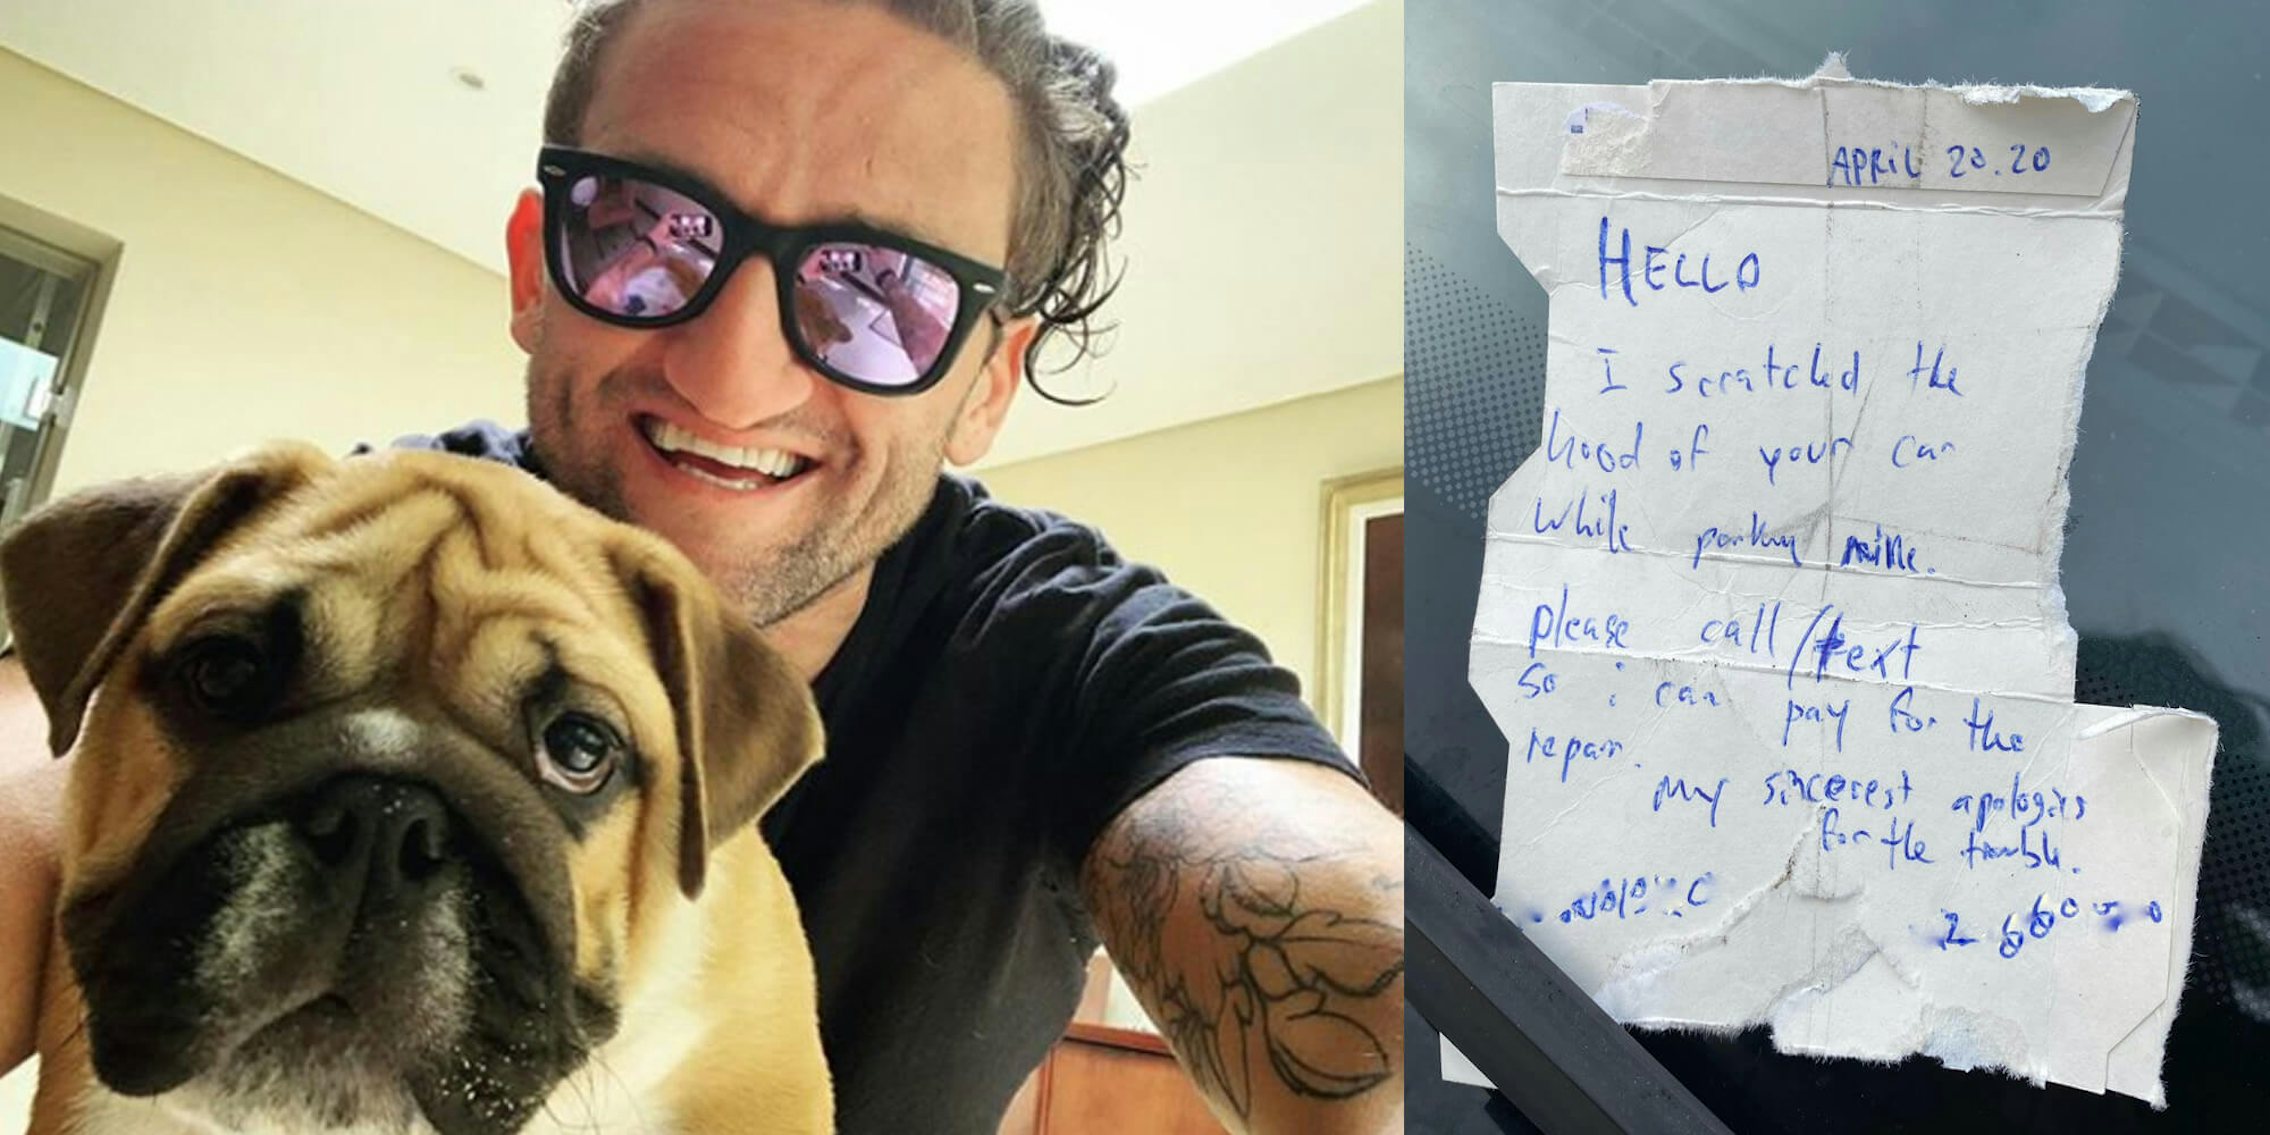 a picture of casey neistat next to a note he left on a car after he scraped it